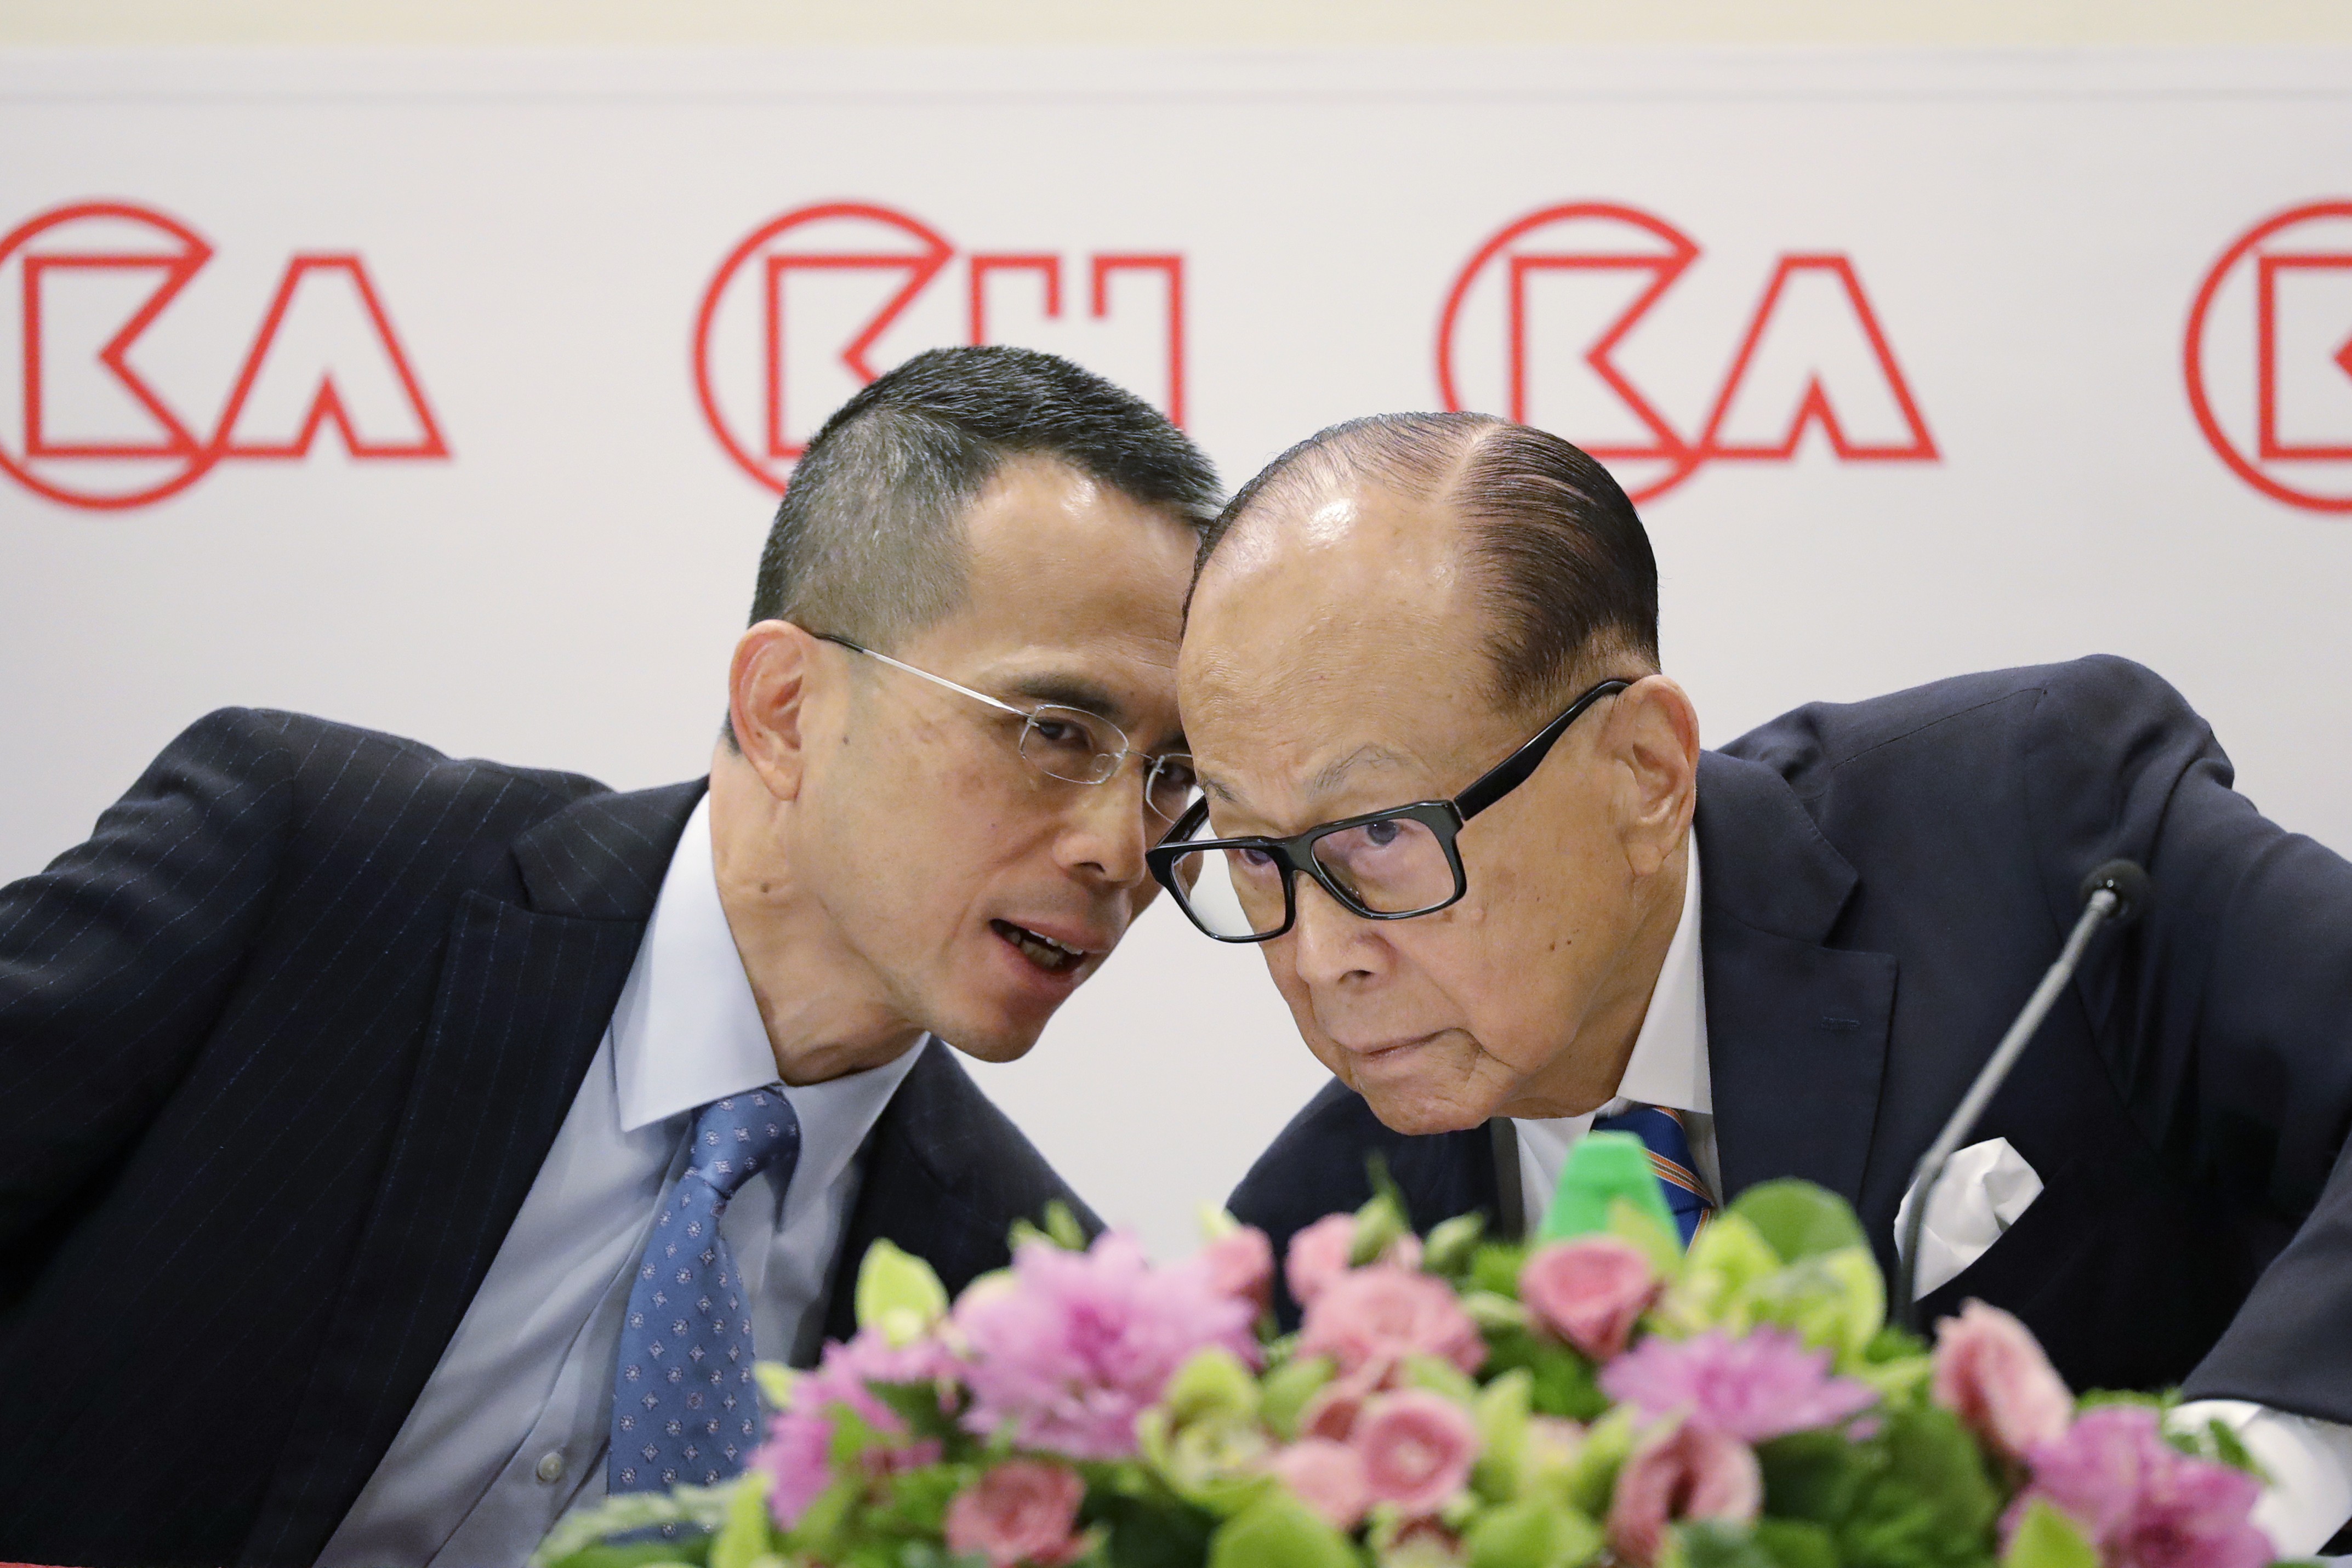 Hong Kong tycoon Li Ka-shing (right) confers with his son Victor Li at CK Hutchison Holdings’ results announcement on March 16, 2018. Since Li Ka-shing’s retirement, Victor Li has taken up his father’s mantle. Photo: AP